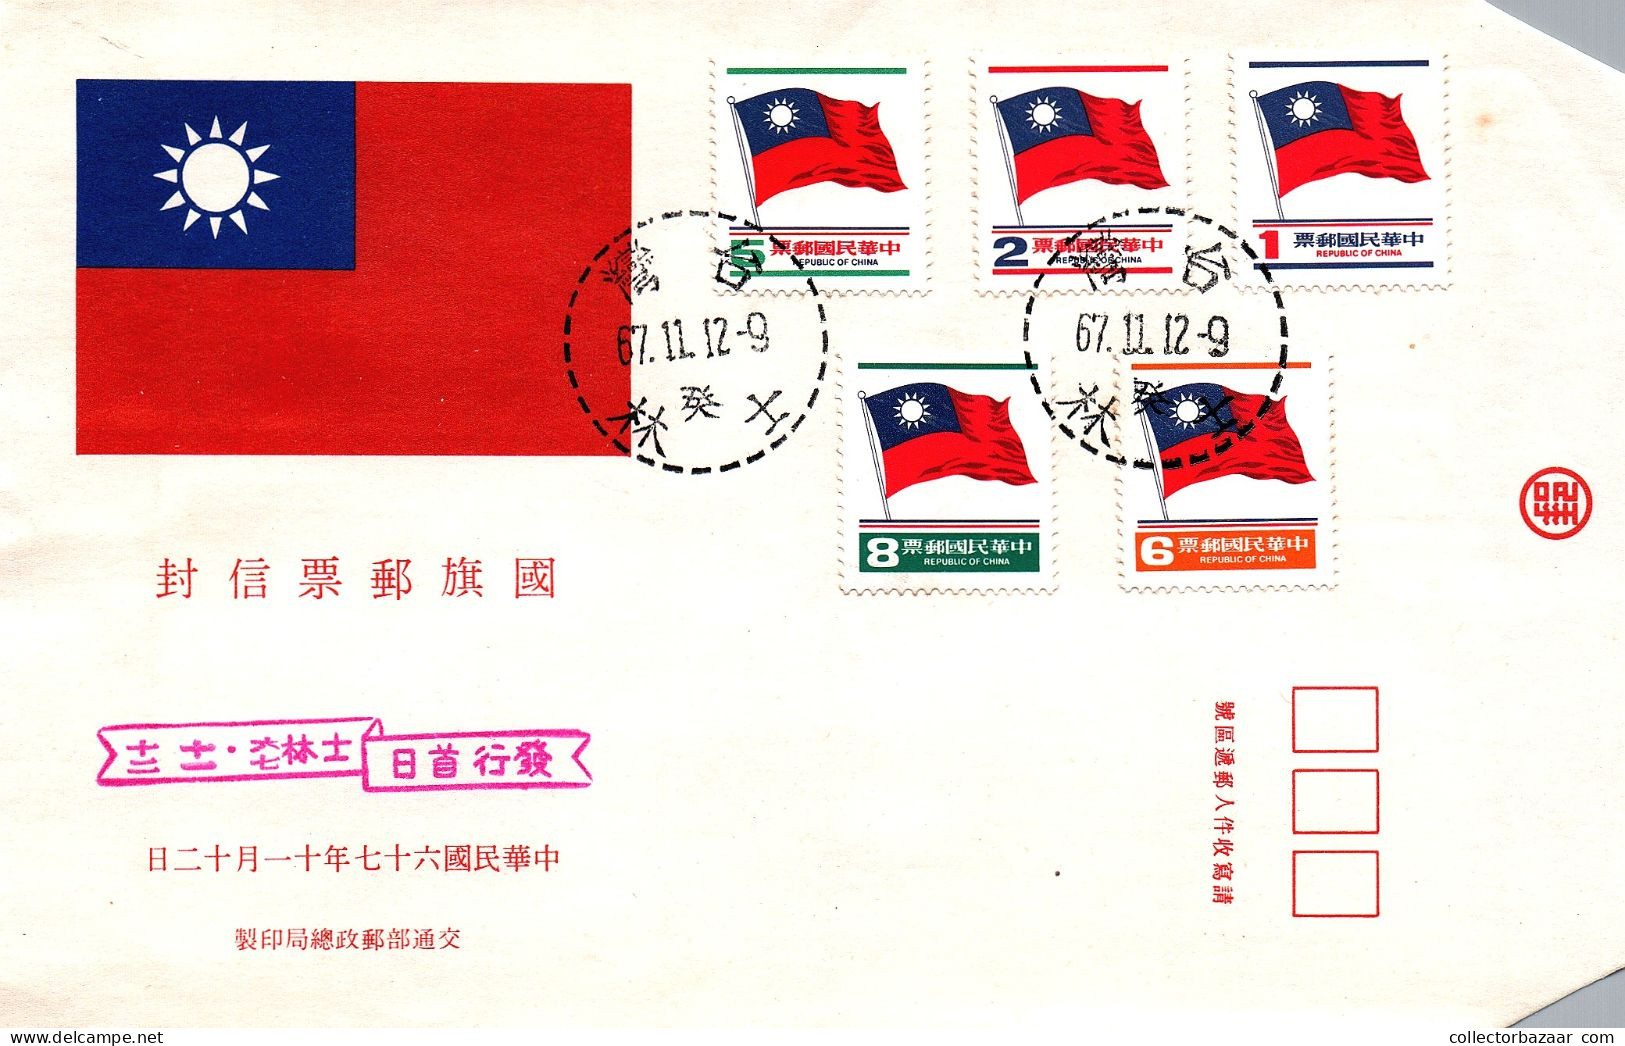 Taiwan Formosa Republic Of China FDC Taiwan Flag  - 8$, 6$, 5$, 2$ And 1$ Stamps - FDC